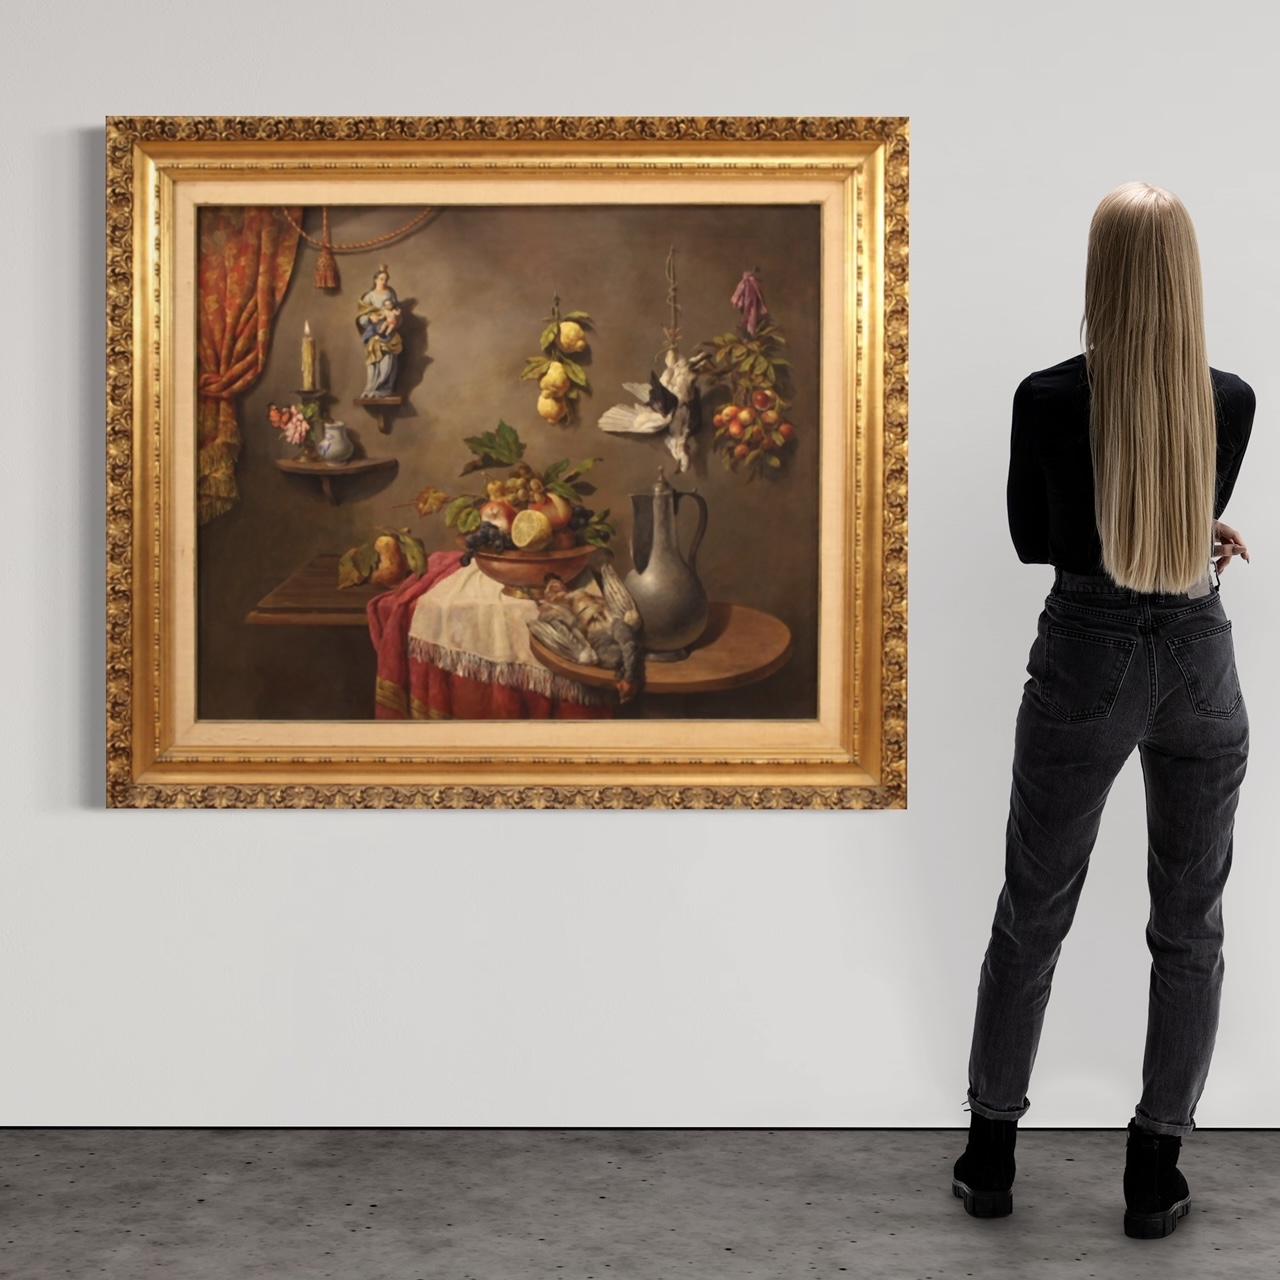 Italian painting from the middle of the 20th century. Oil on canvas framework depicting a particular still life trompe l'oeil with game, fruit, pottery and sculpture of excellent pictorial quality. Painting of great measure and impact, for antique